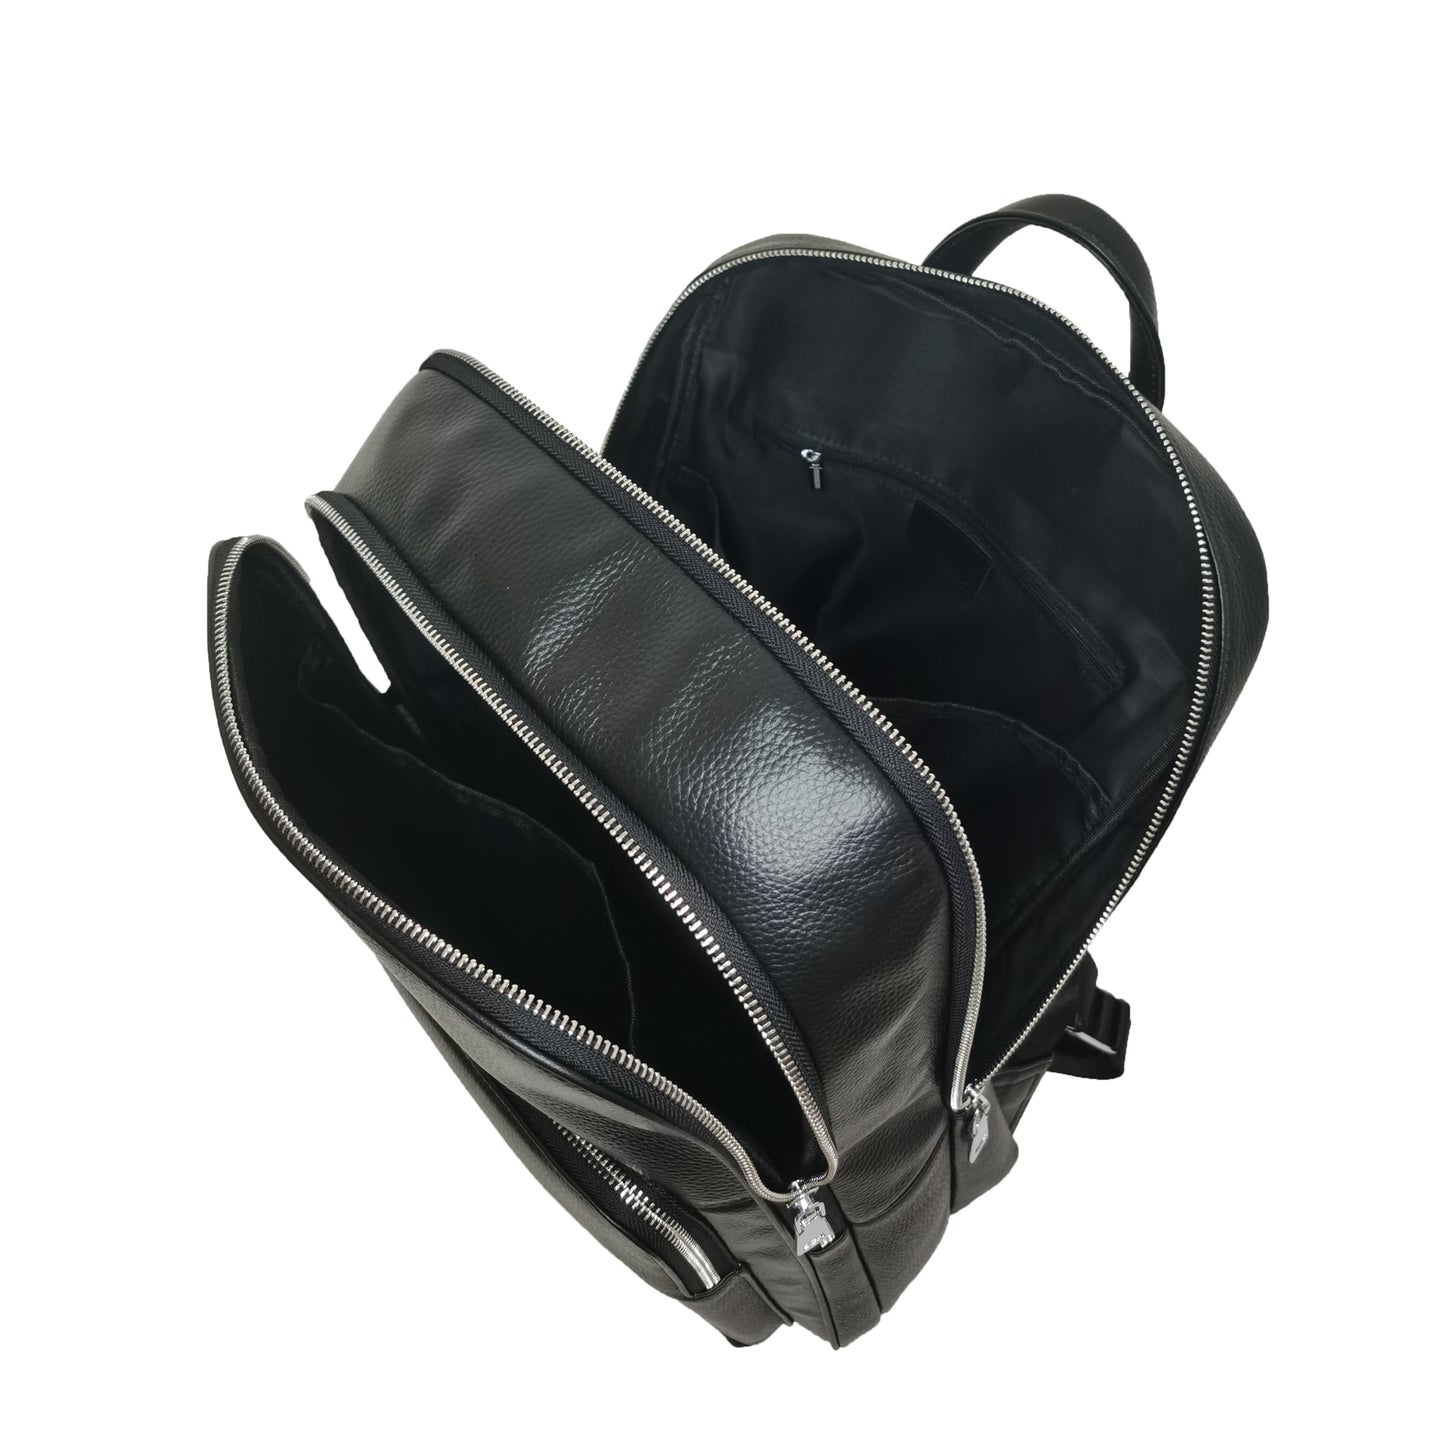 Unisex cowhide leather backpack by Tomorrow Closet